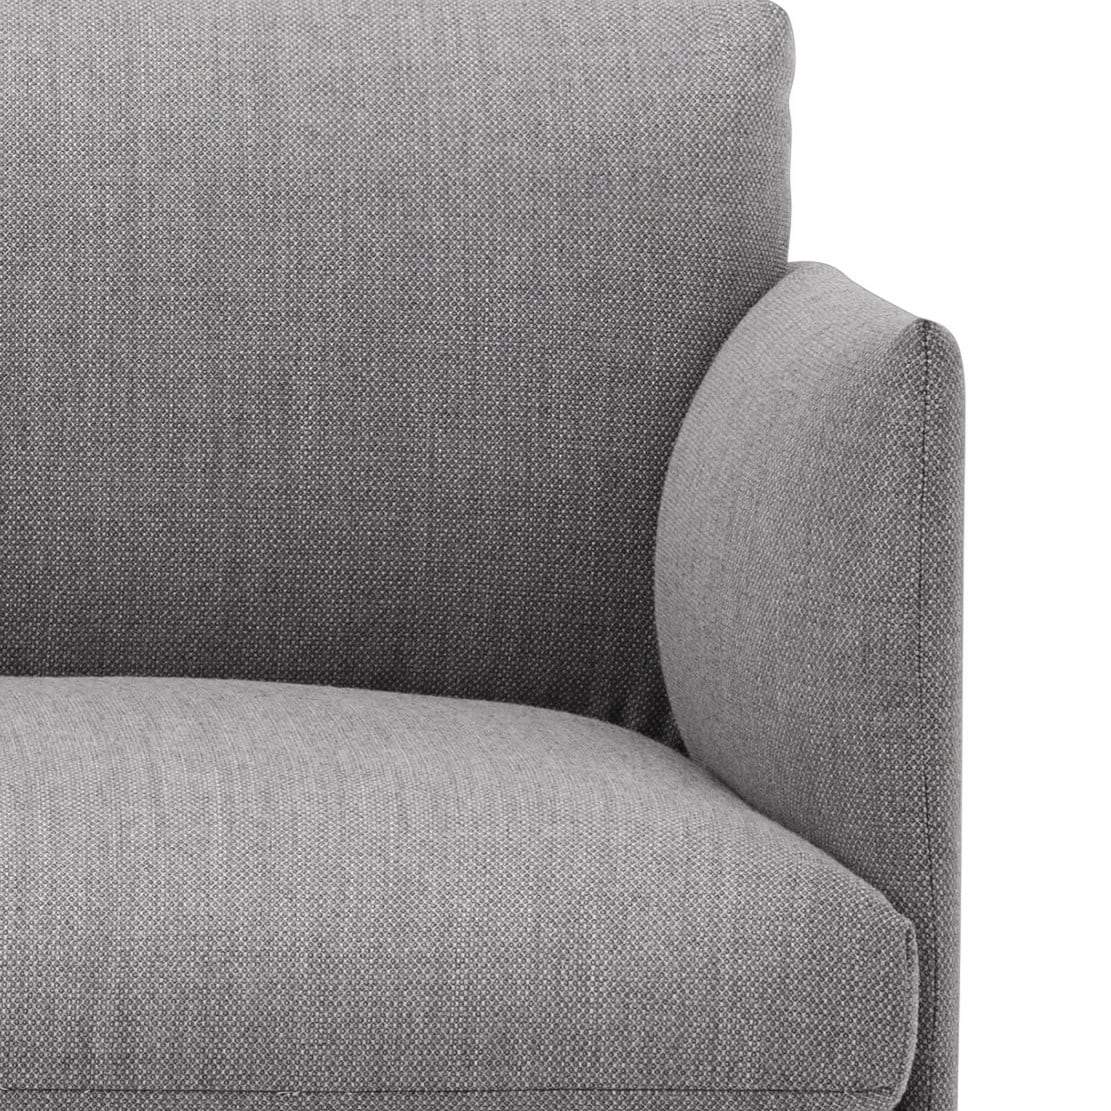 Muuto Outline Sofa Studio in fiord 151 grey fabric. Made to order from someday designs.  #colour_fiord-151